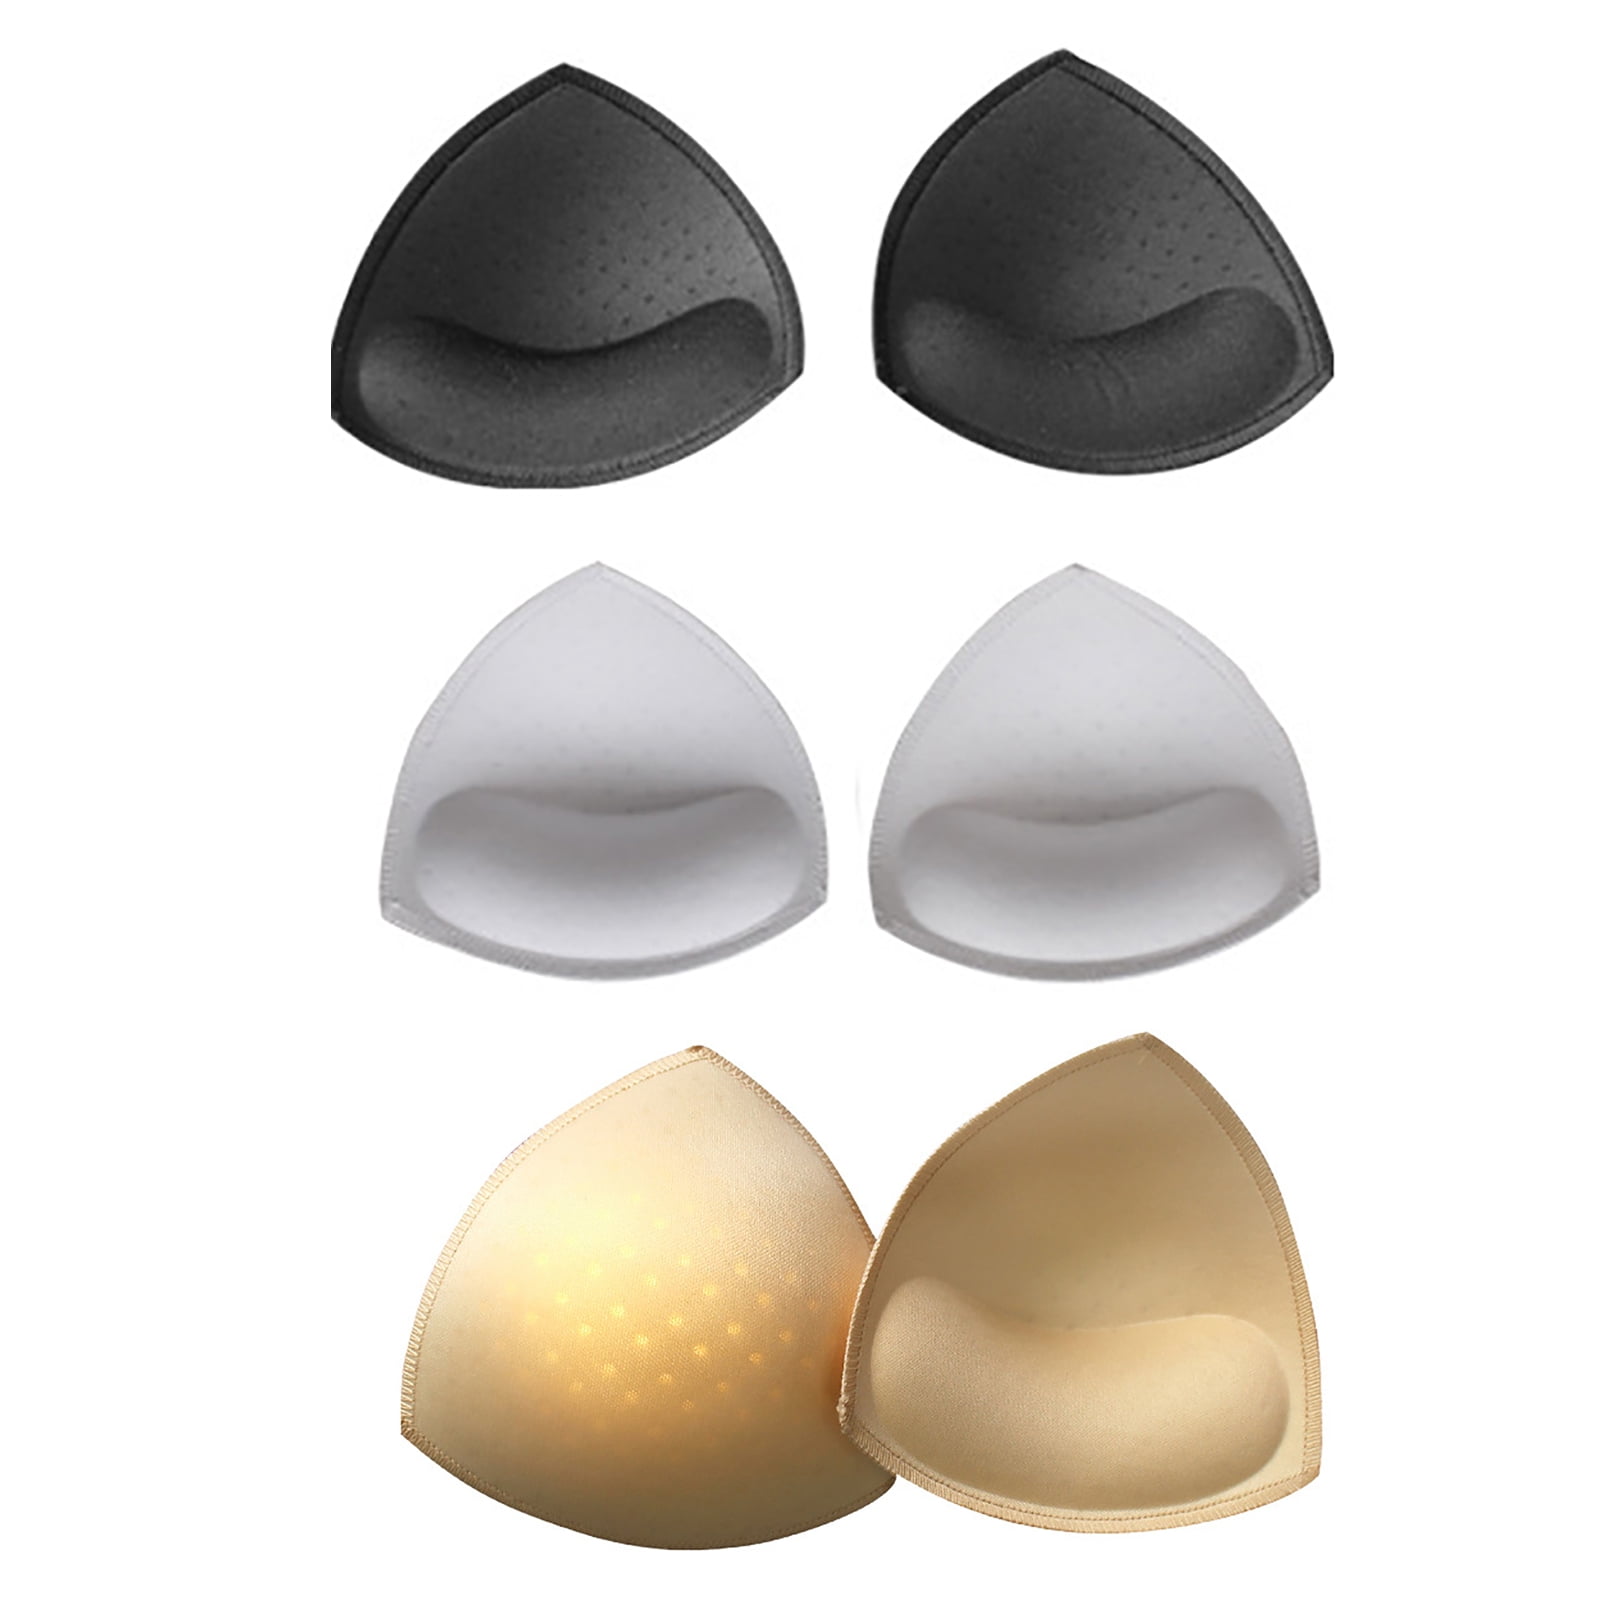 BIOSA Bra Pad Inserts 3 Pairs Push Up Breast Enhancer Cups for